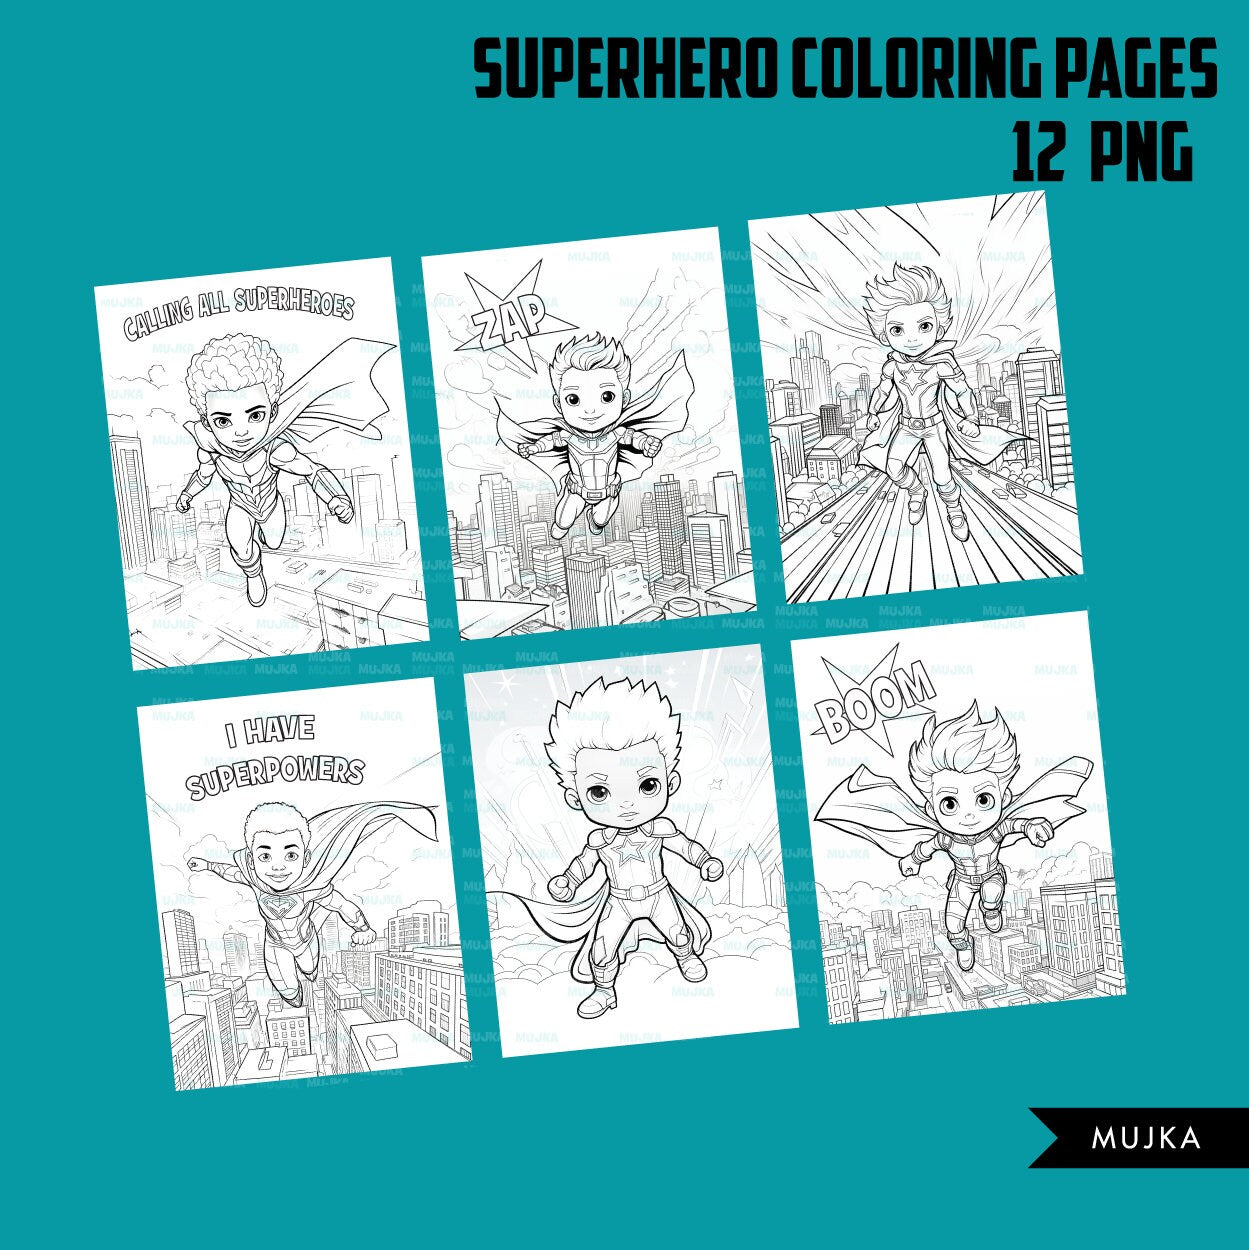 Superhero Coloring Pages, Printable coloring book for boys, Kids Coloring Book, Superhero birthday, instant download PNG black and white